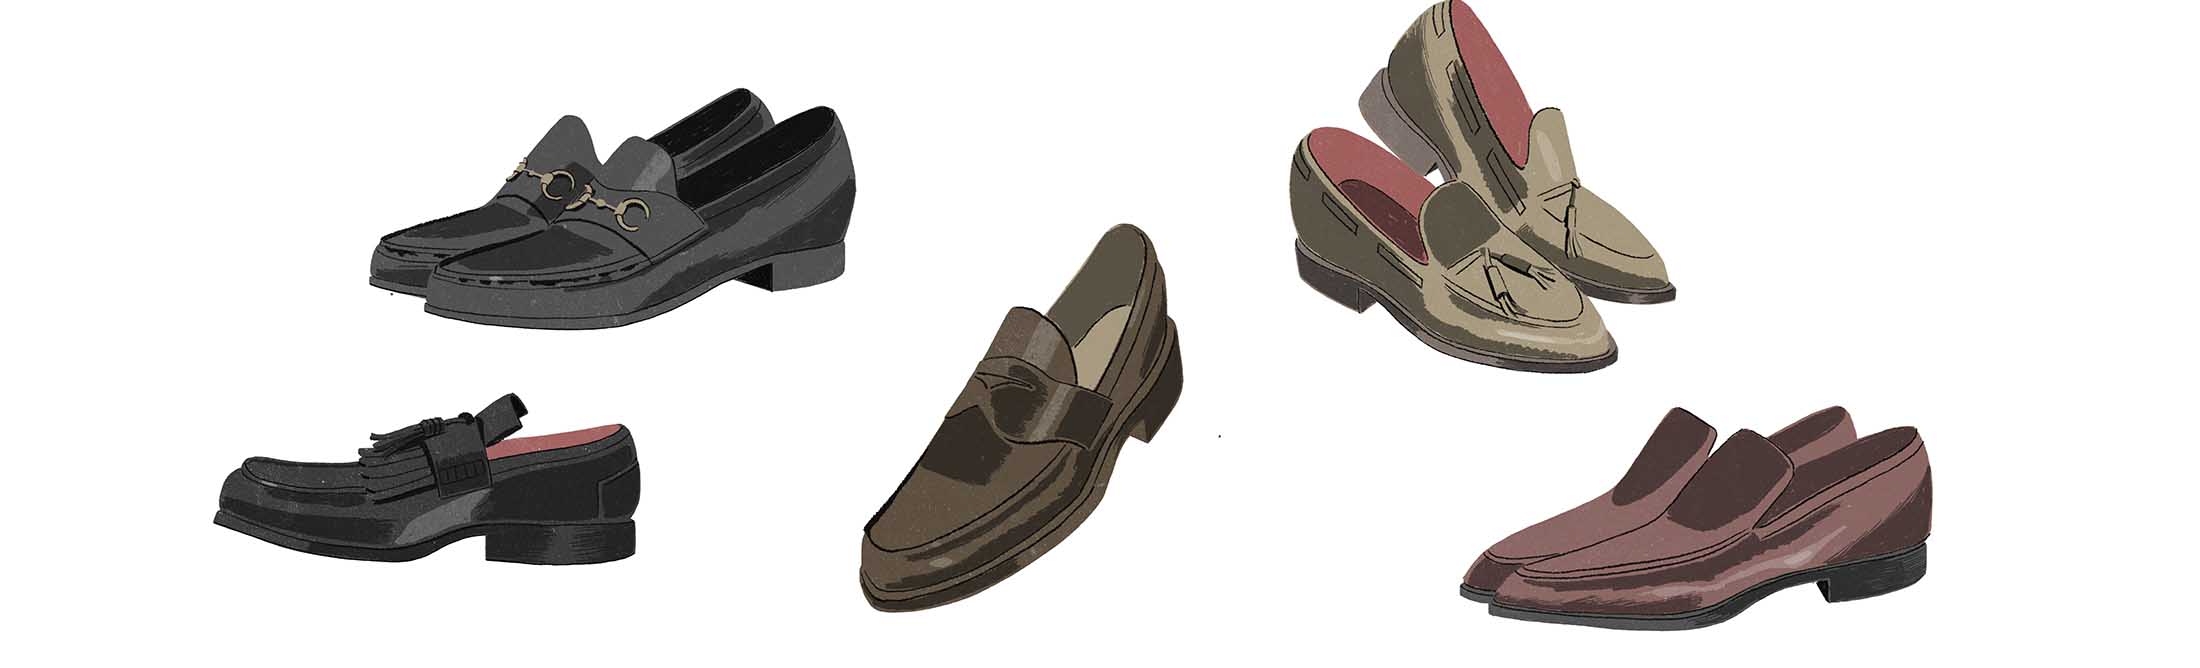 Succession: $4,000 for a pair of loafers? The discreet shoes that obsess  the wealthy, Society